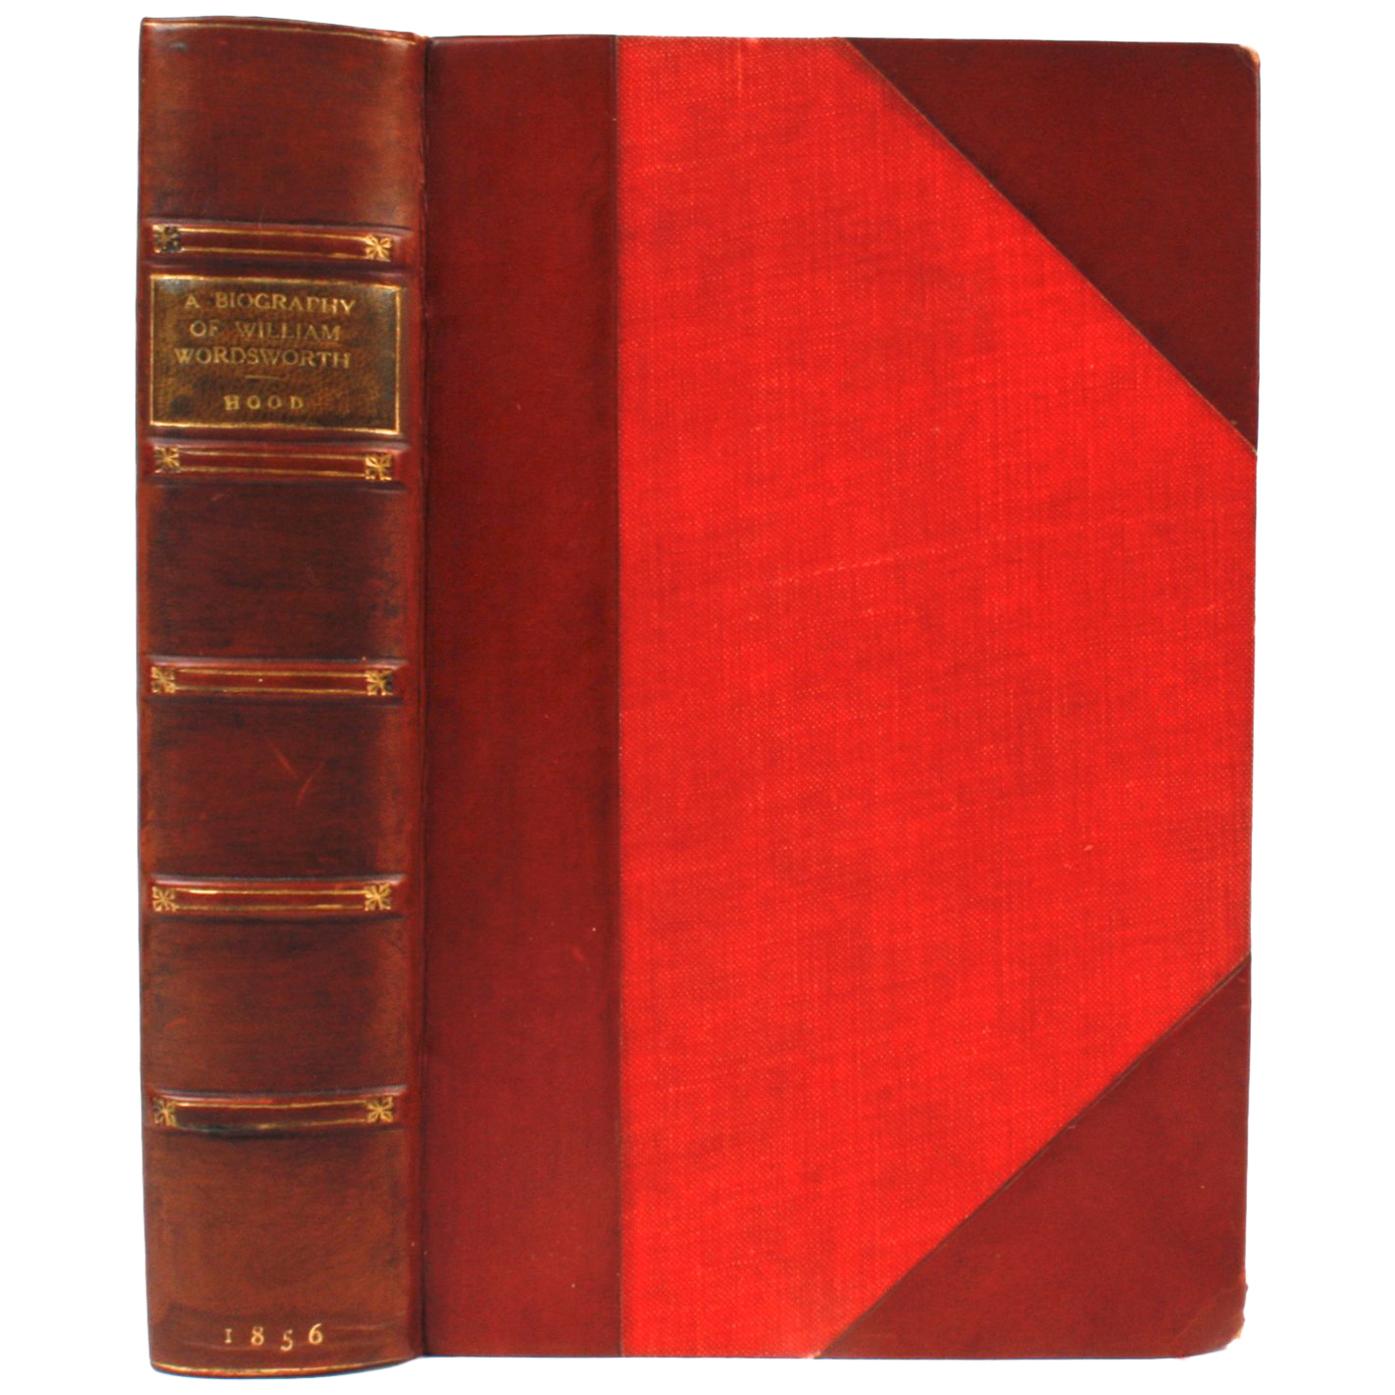 William Wordsworth a Biography by Edwin Paxton Hood, 1856, First Edition